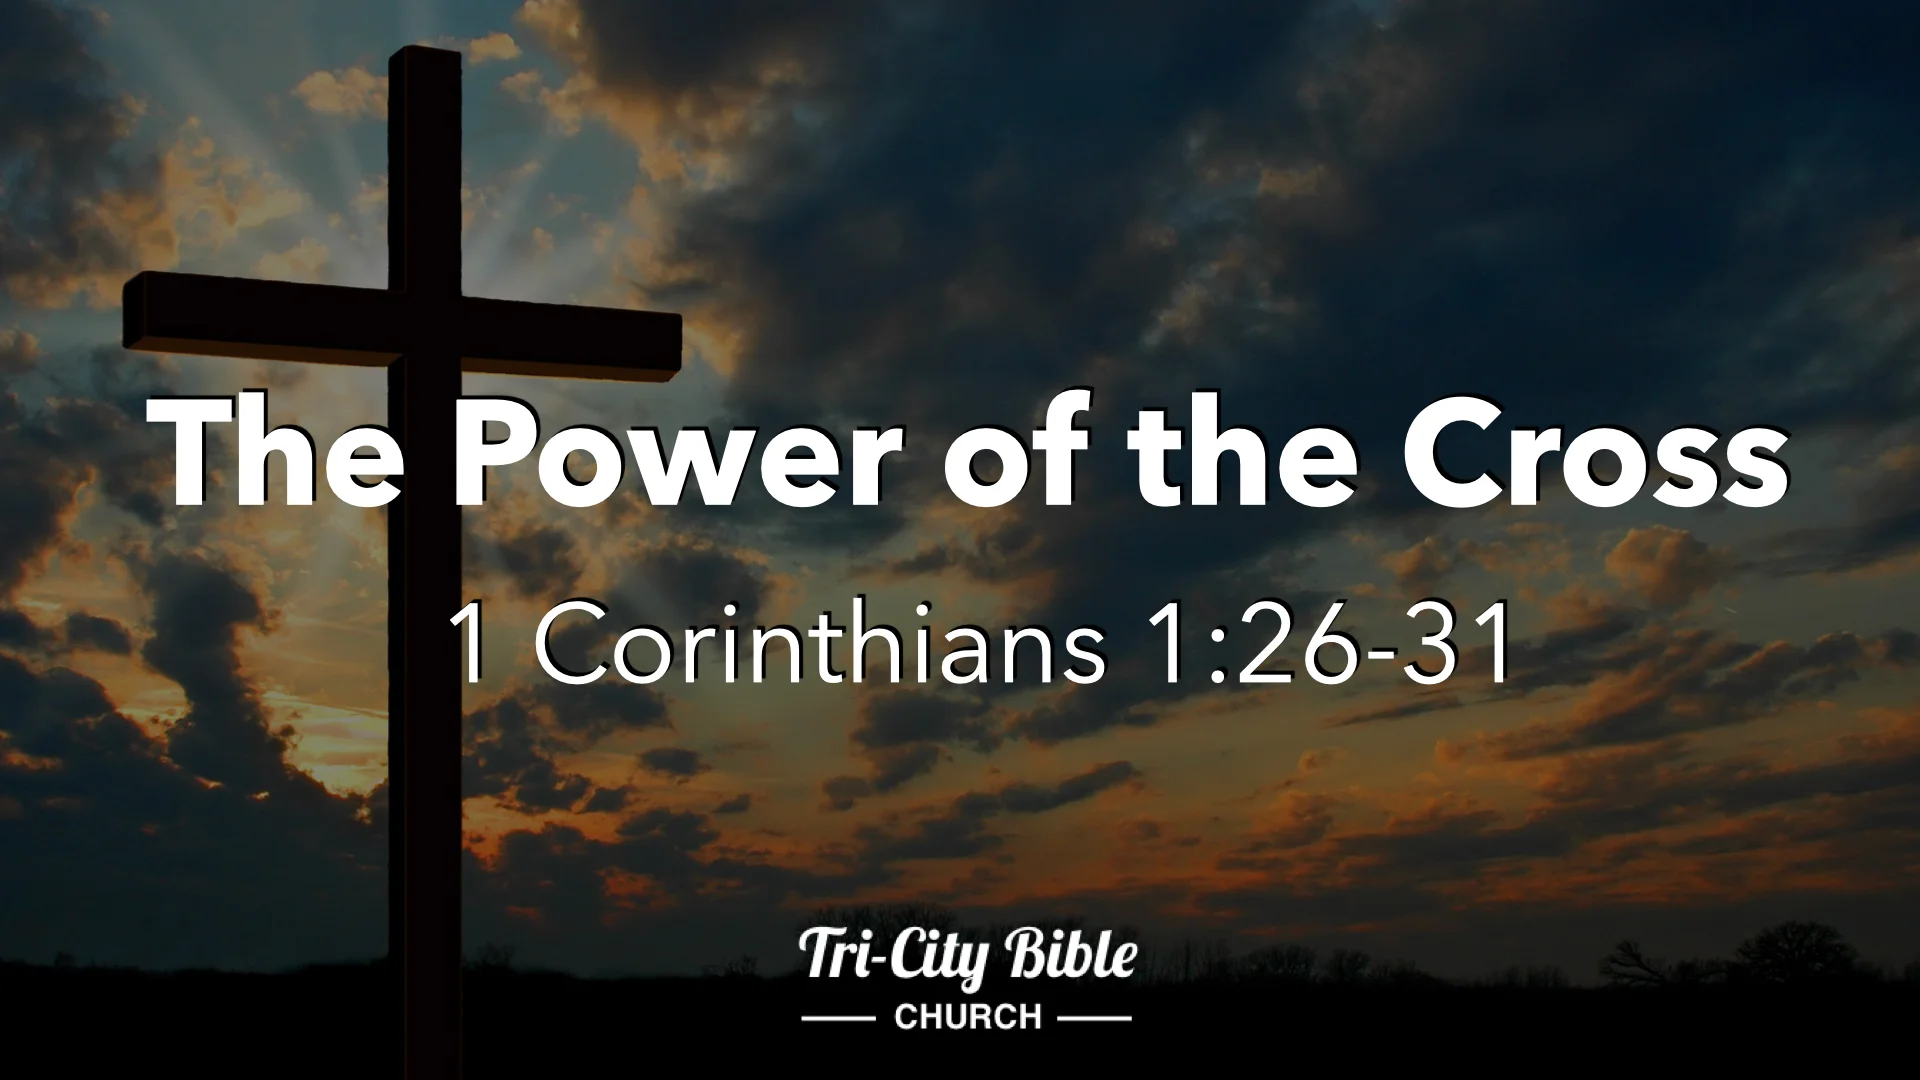 The Power of the Cross on Vimeo